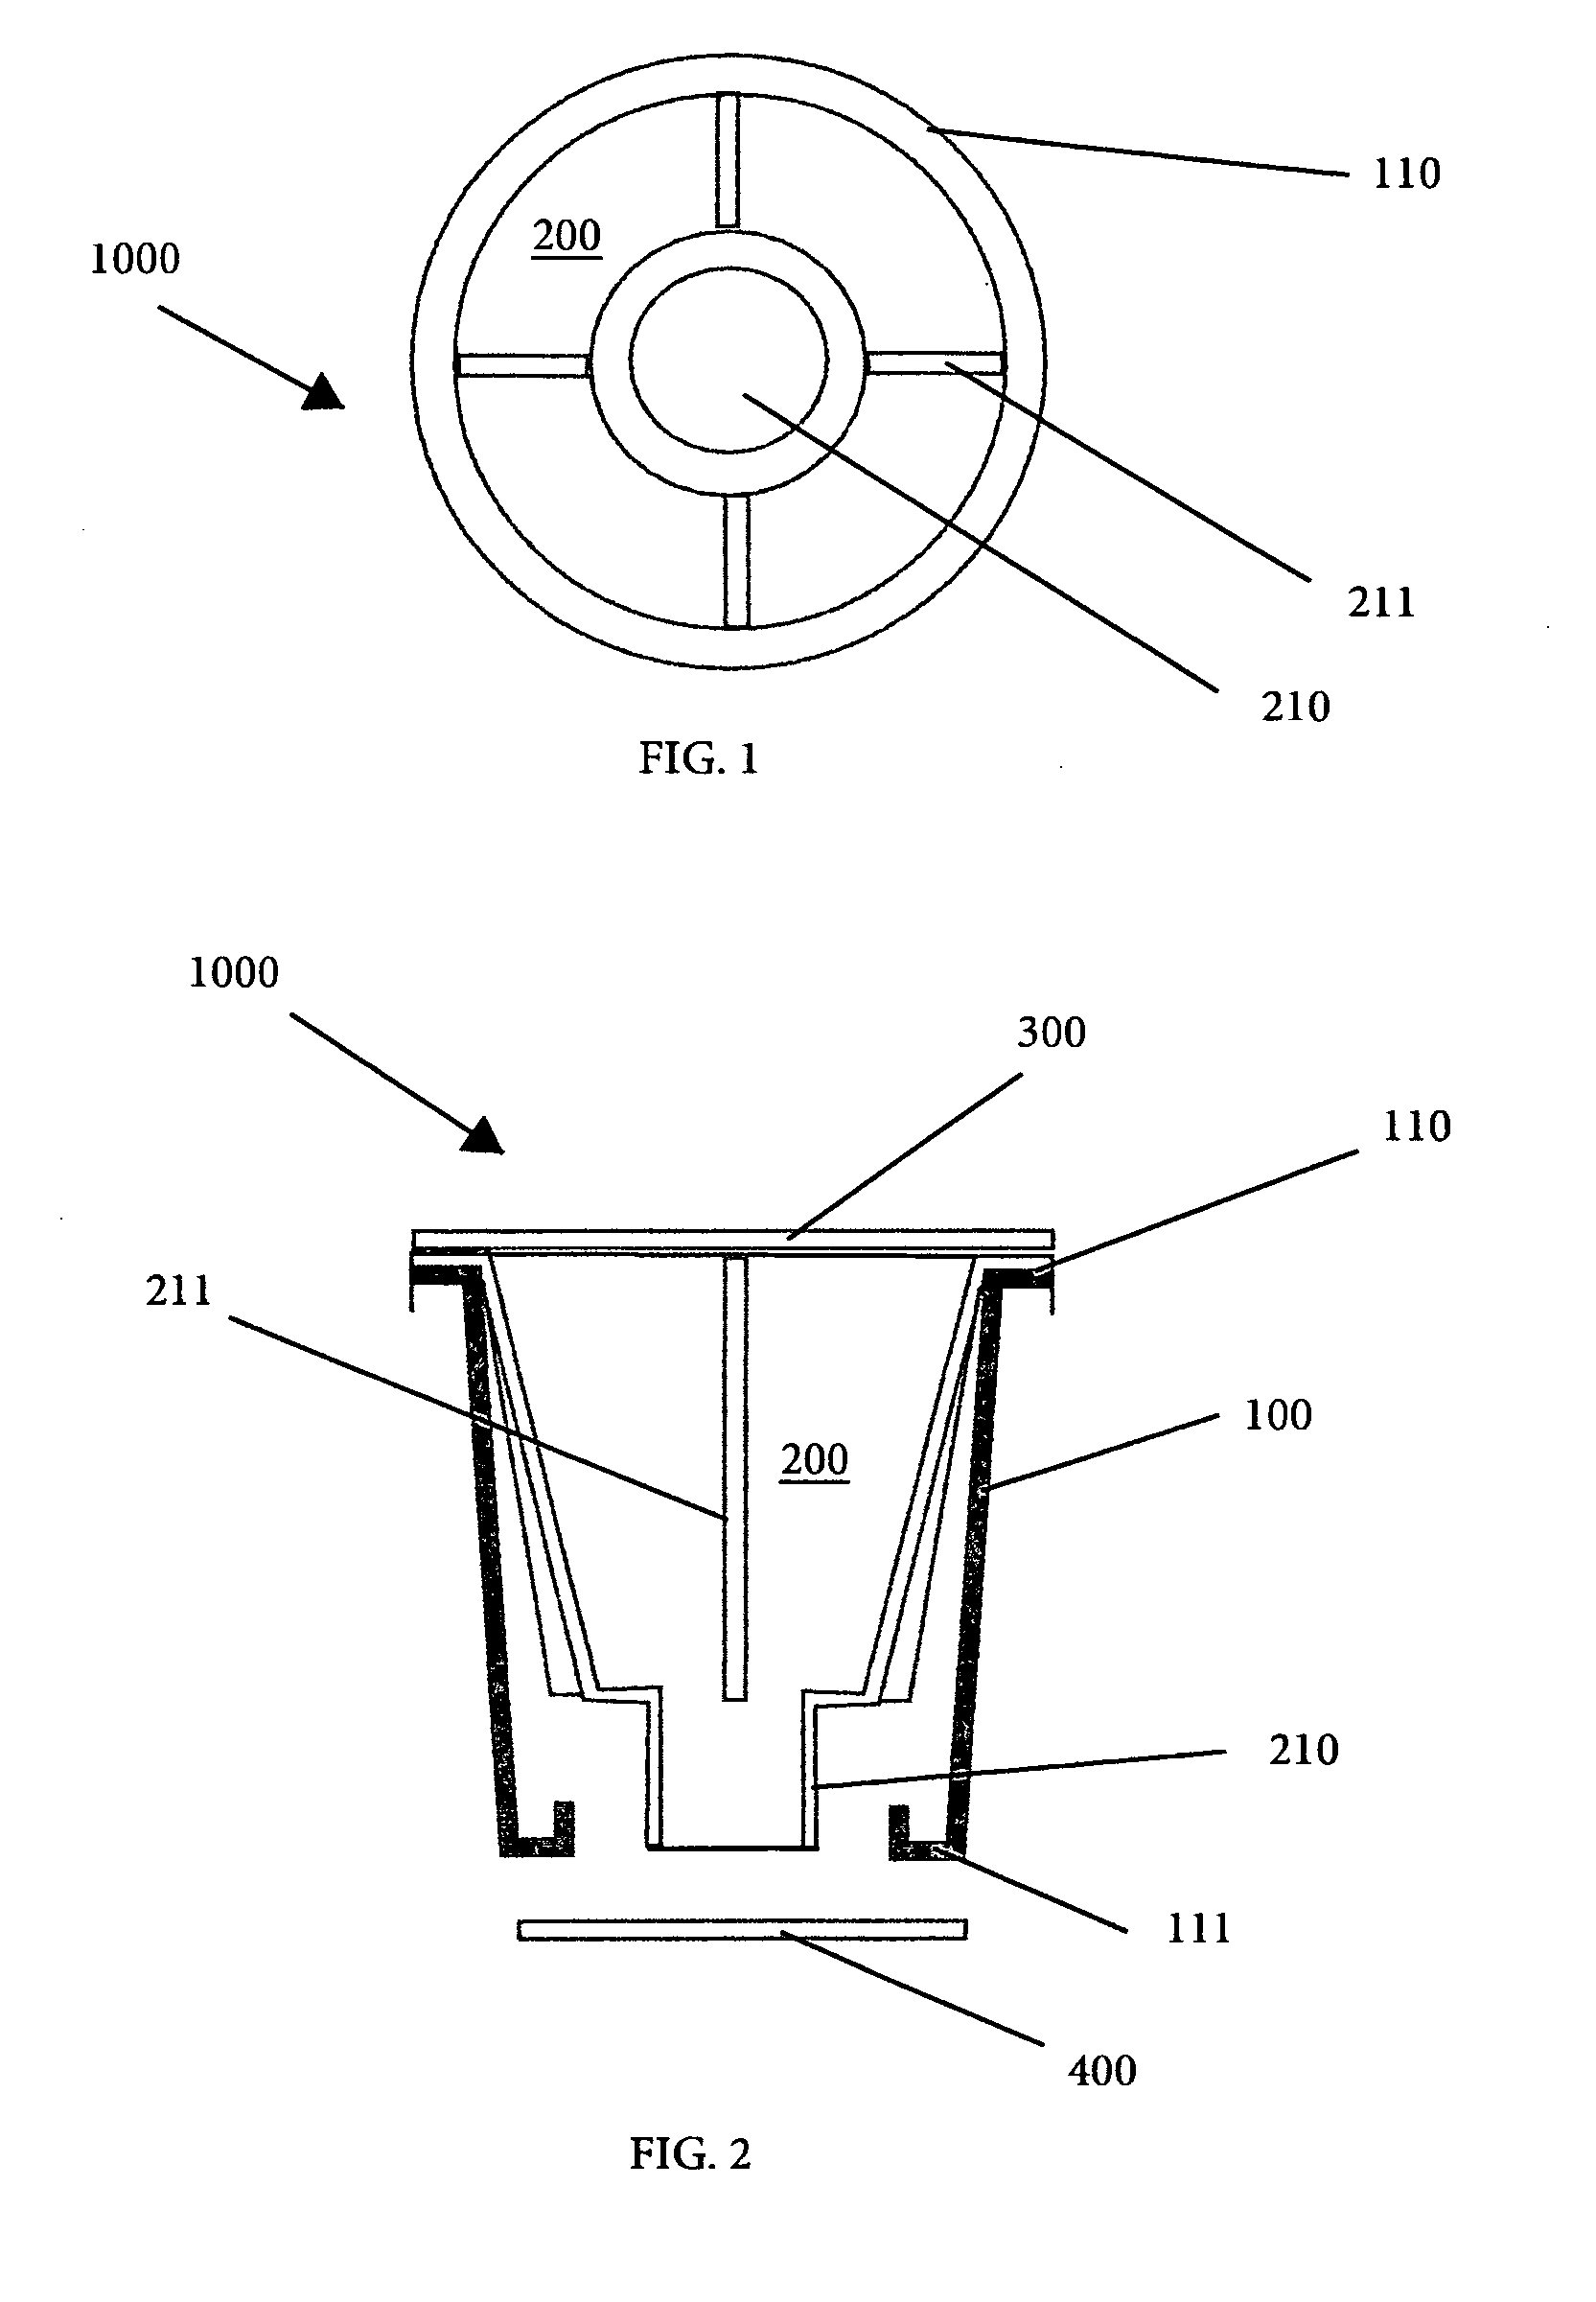 Apparatus and related methods of roasting, grinding, and brewing coffee